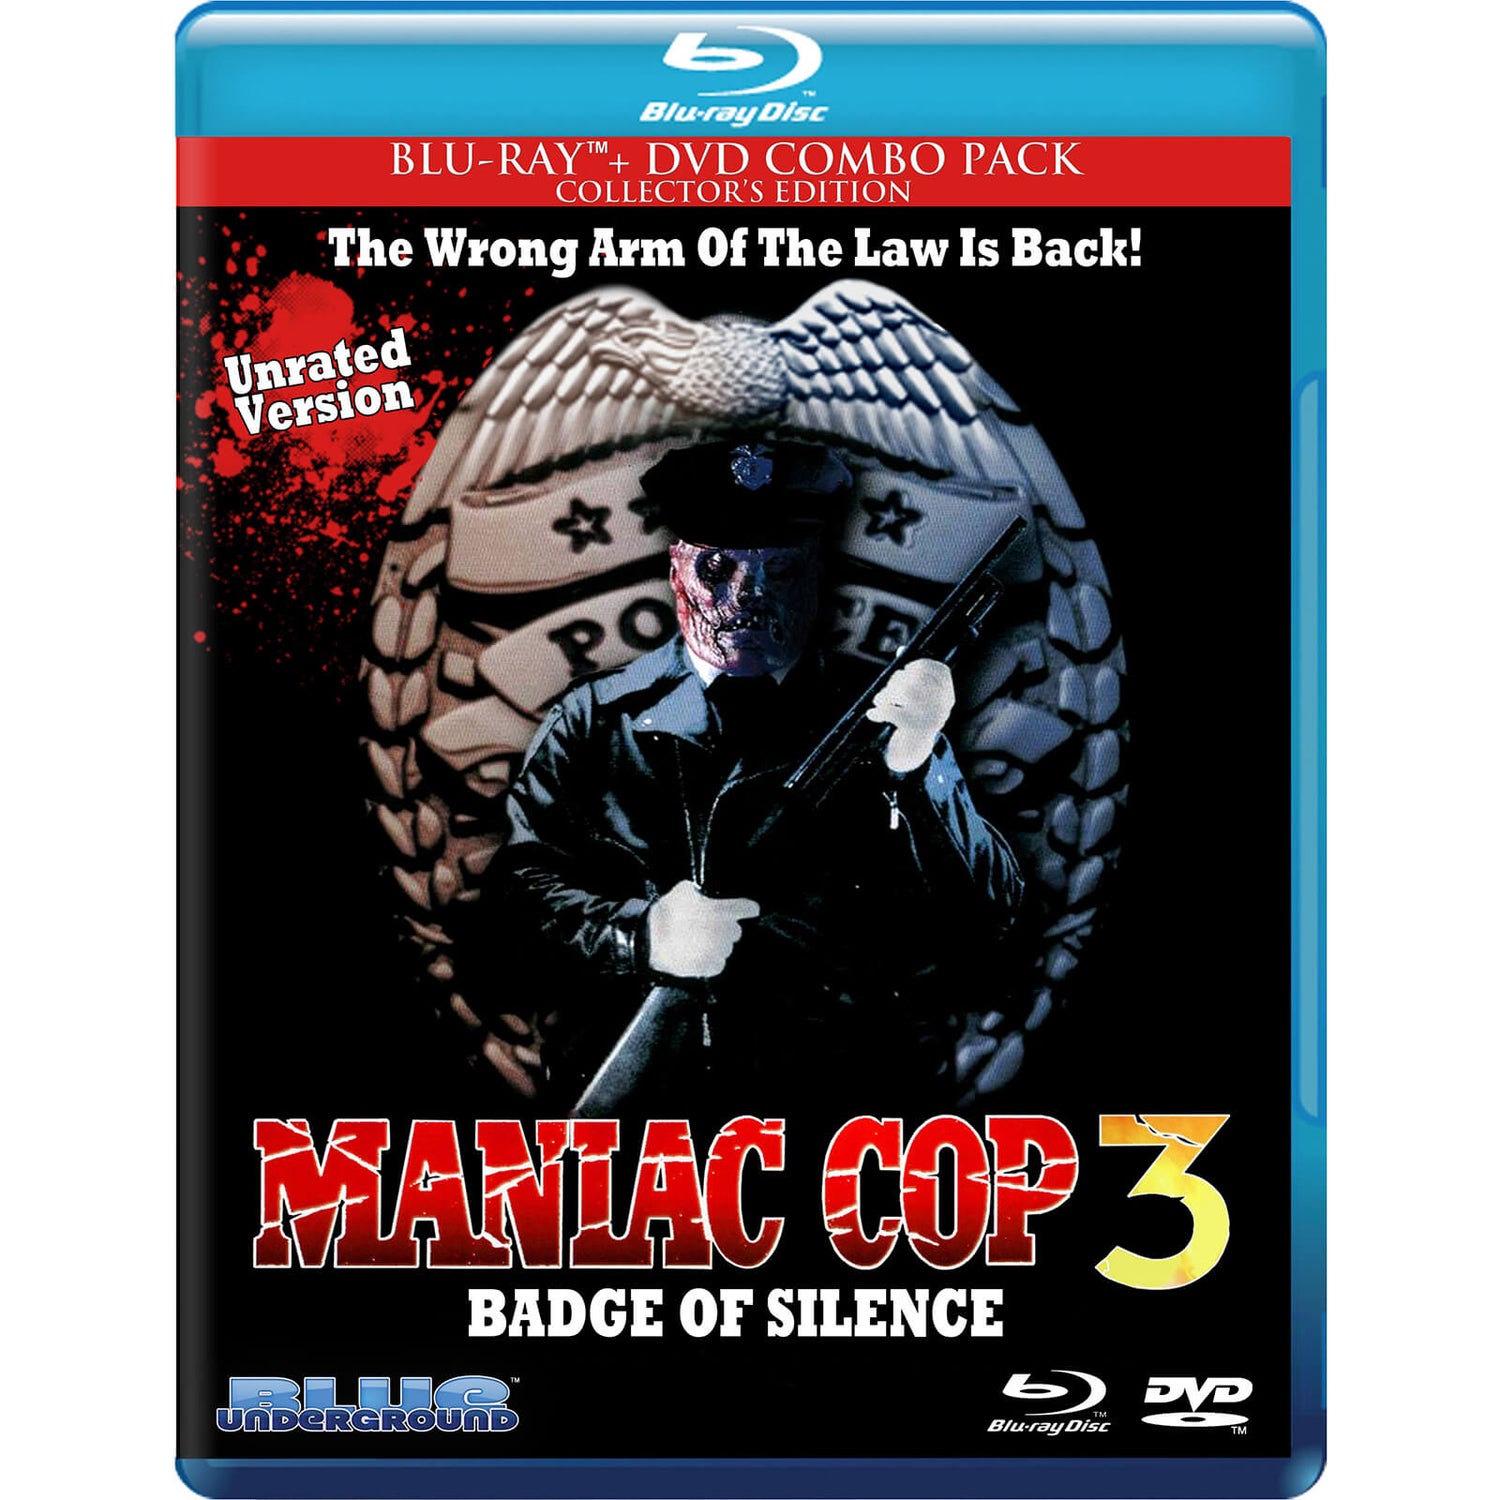 Maniac Cop 3: Badge Of Silence (Includes DVD)